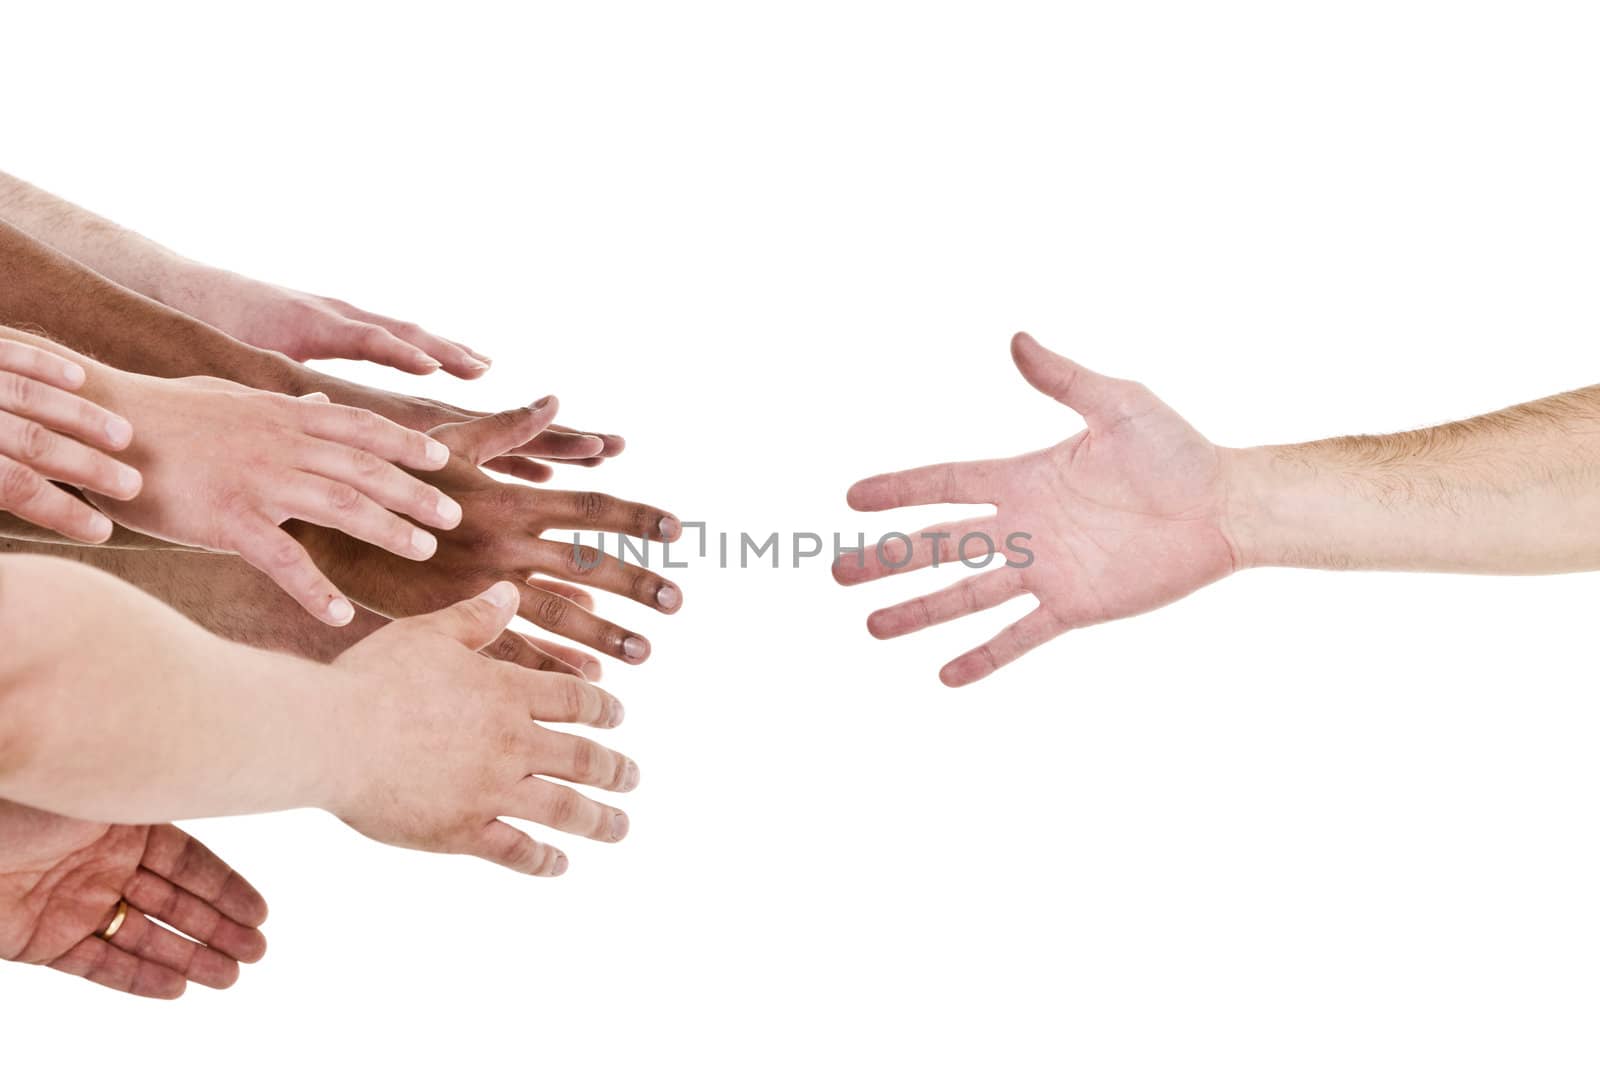 Hand reaching out for help isolated on white background